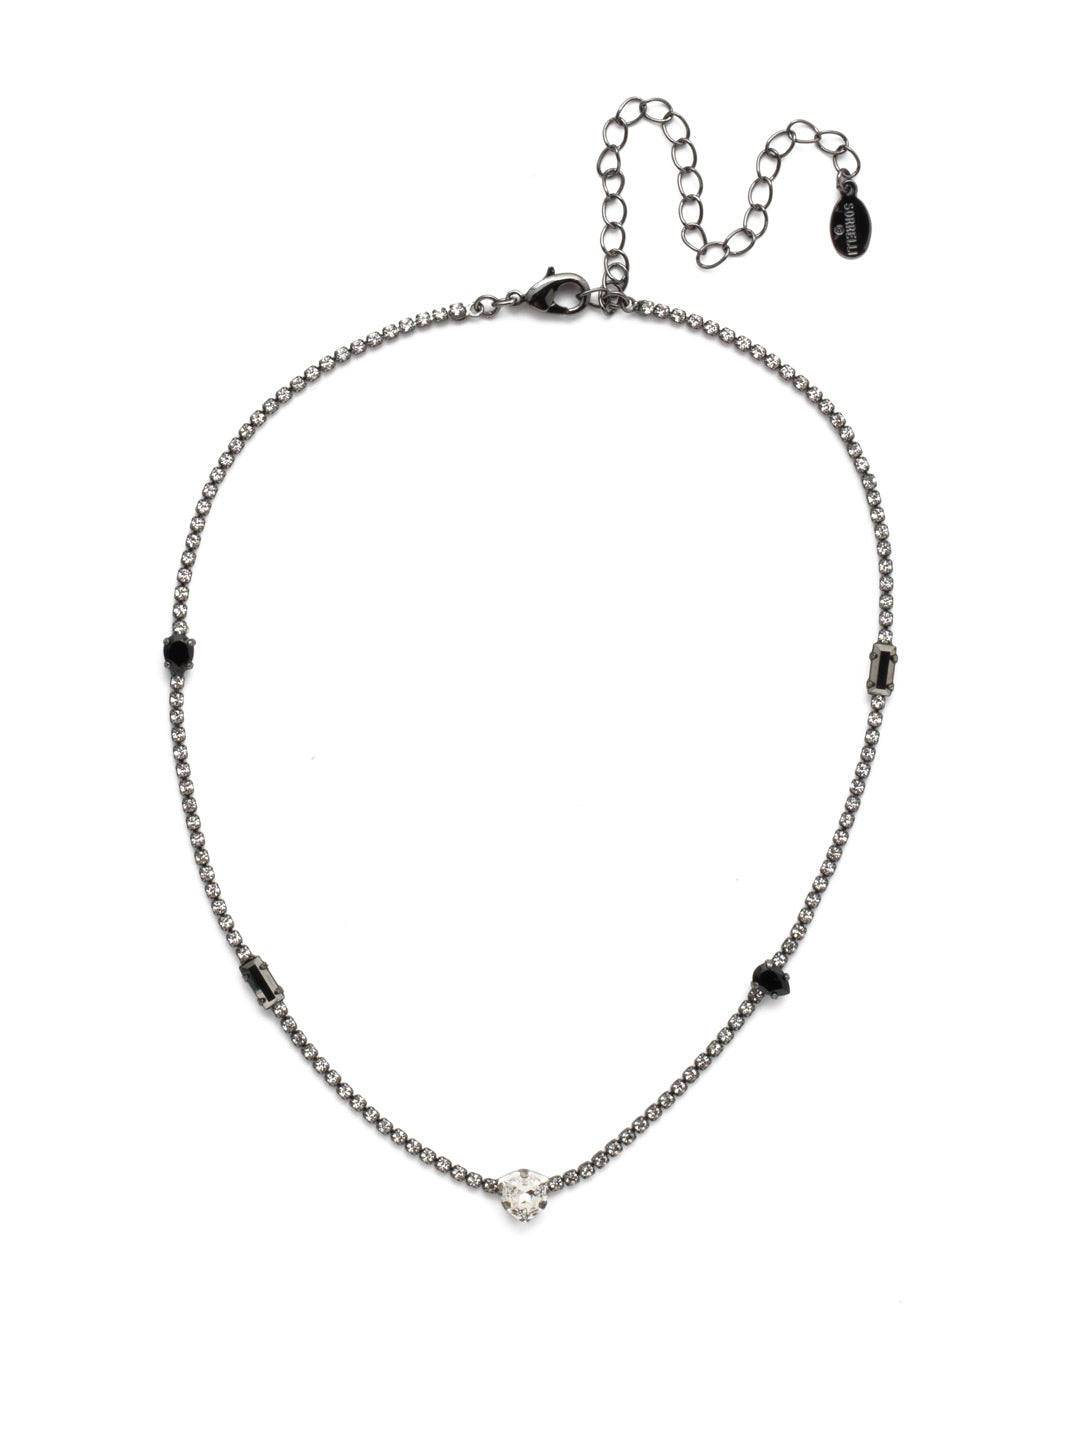 Ophelia Tennis Necklace - NEP9GMMMO